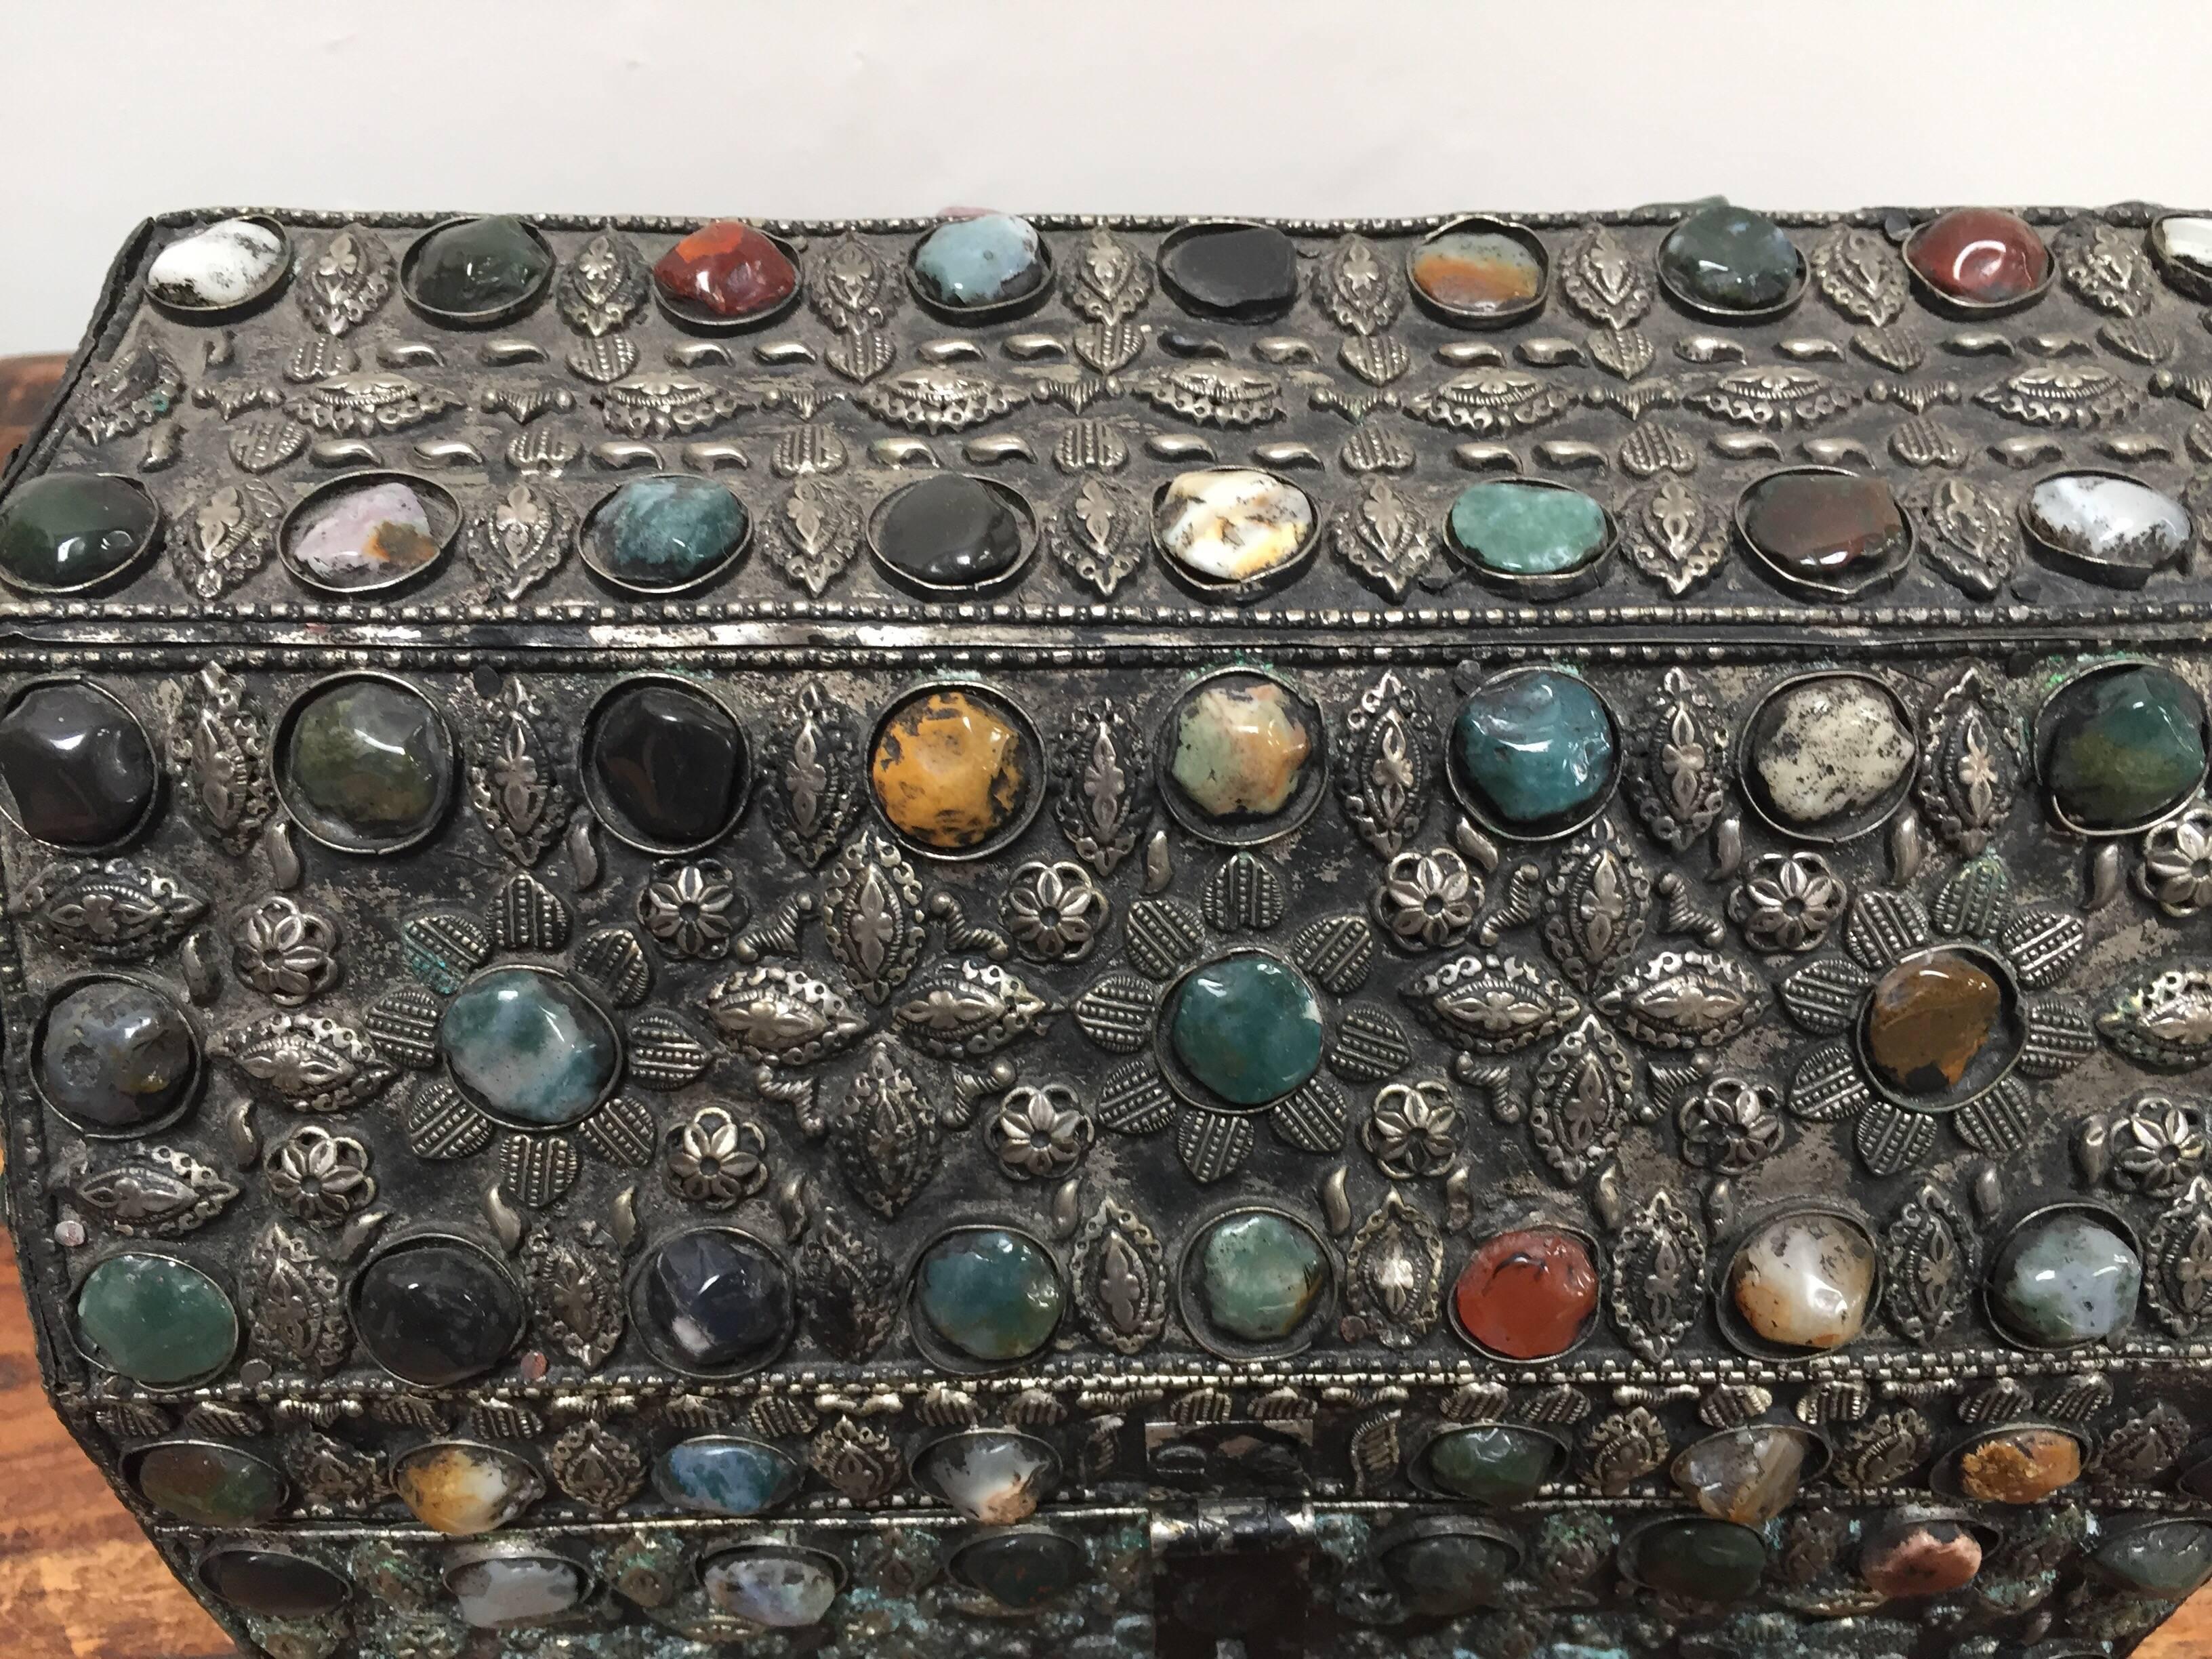 Large Moroccan Wedding Silvered Jewelry Box Inlaid with Semi-Precious Stones For Sale 7